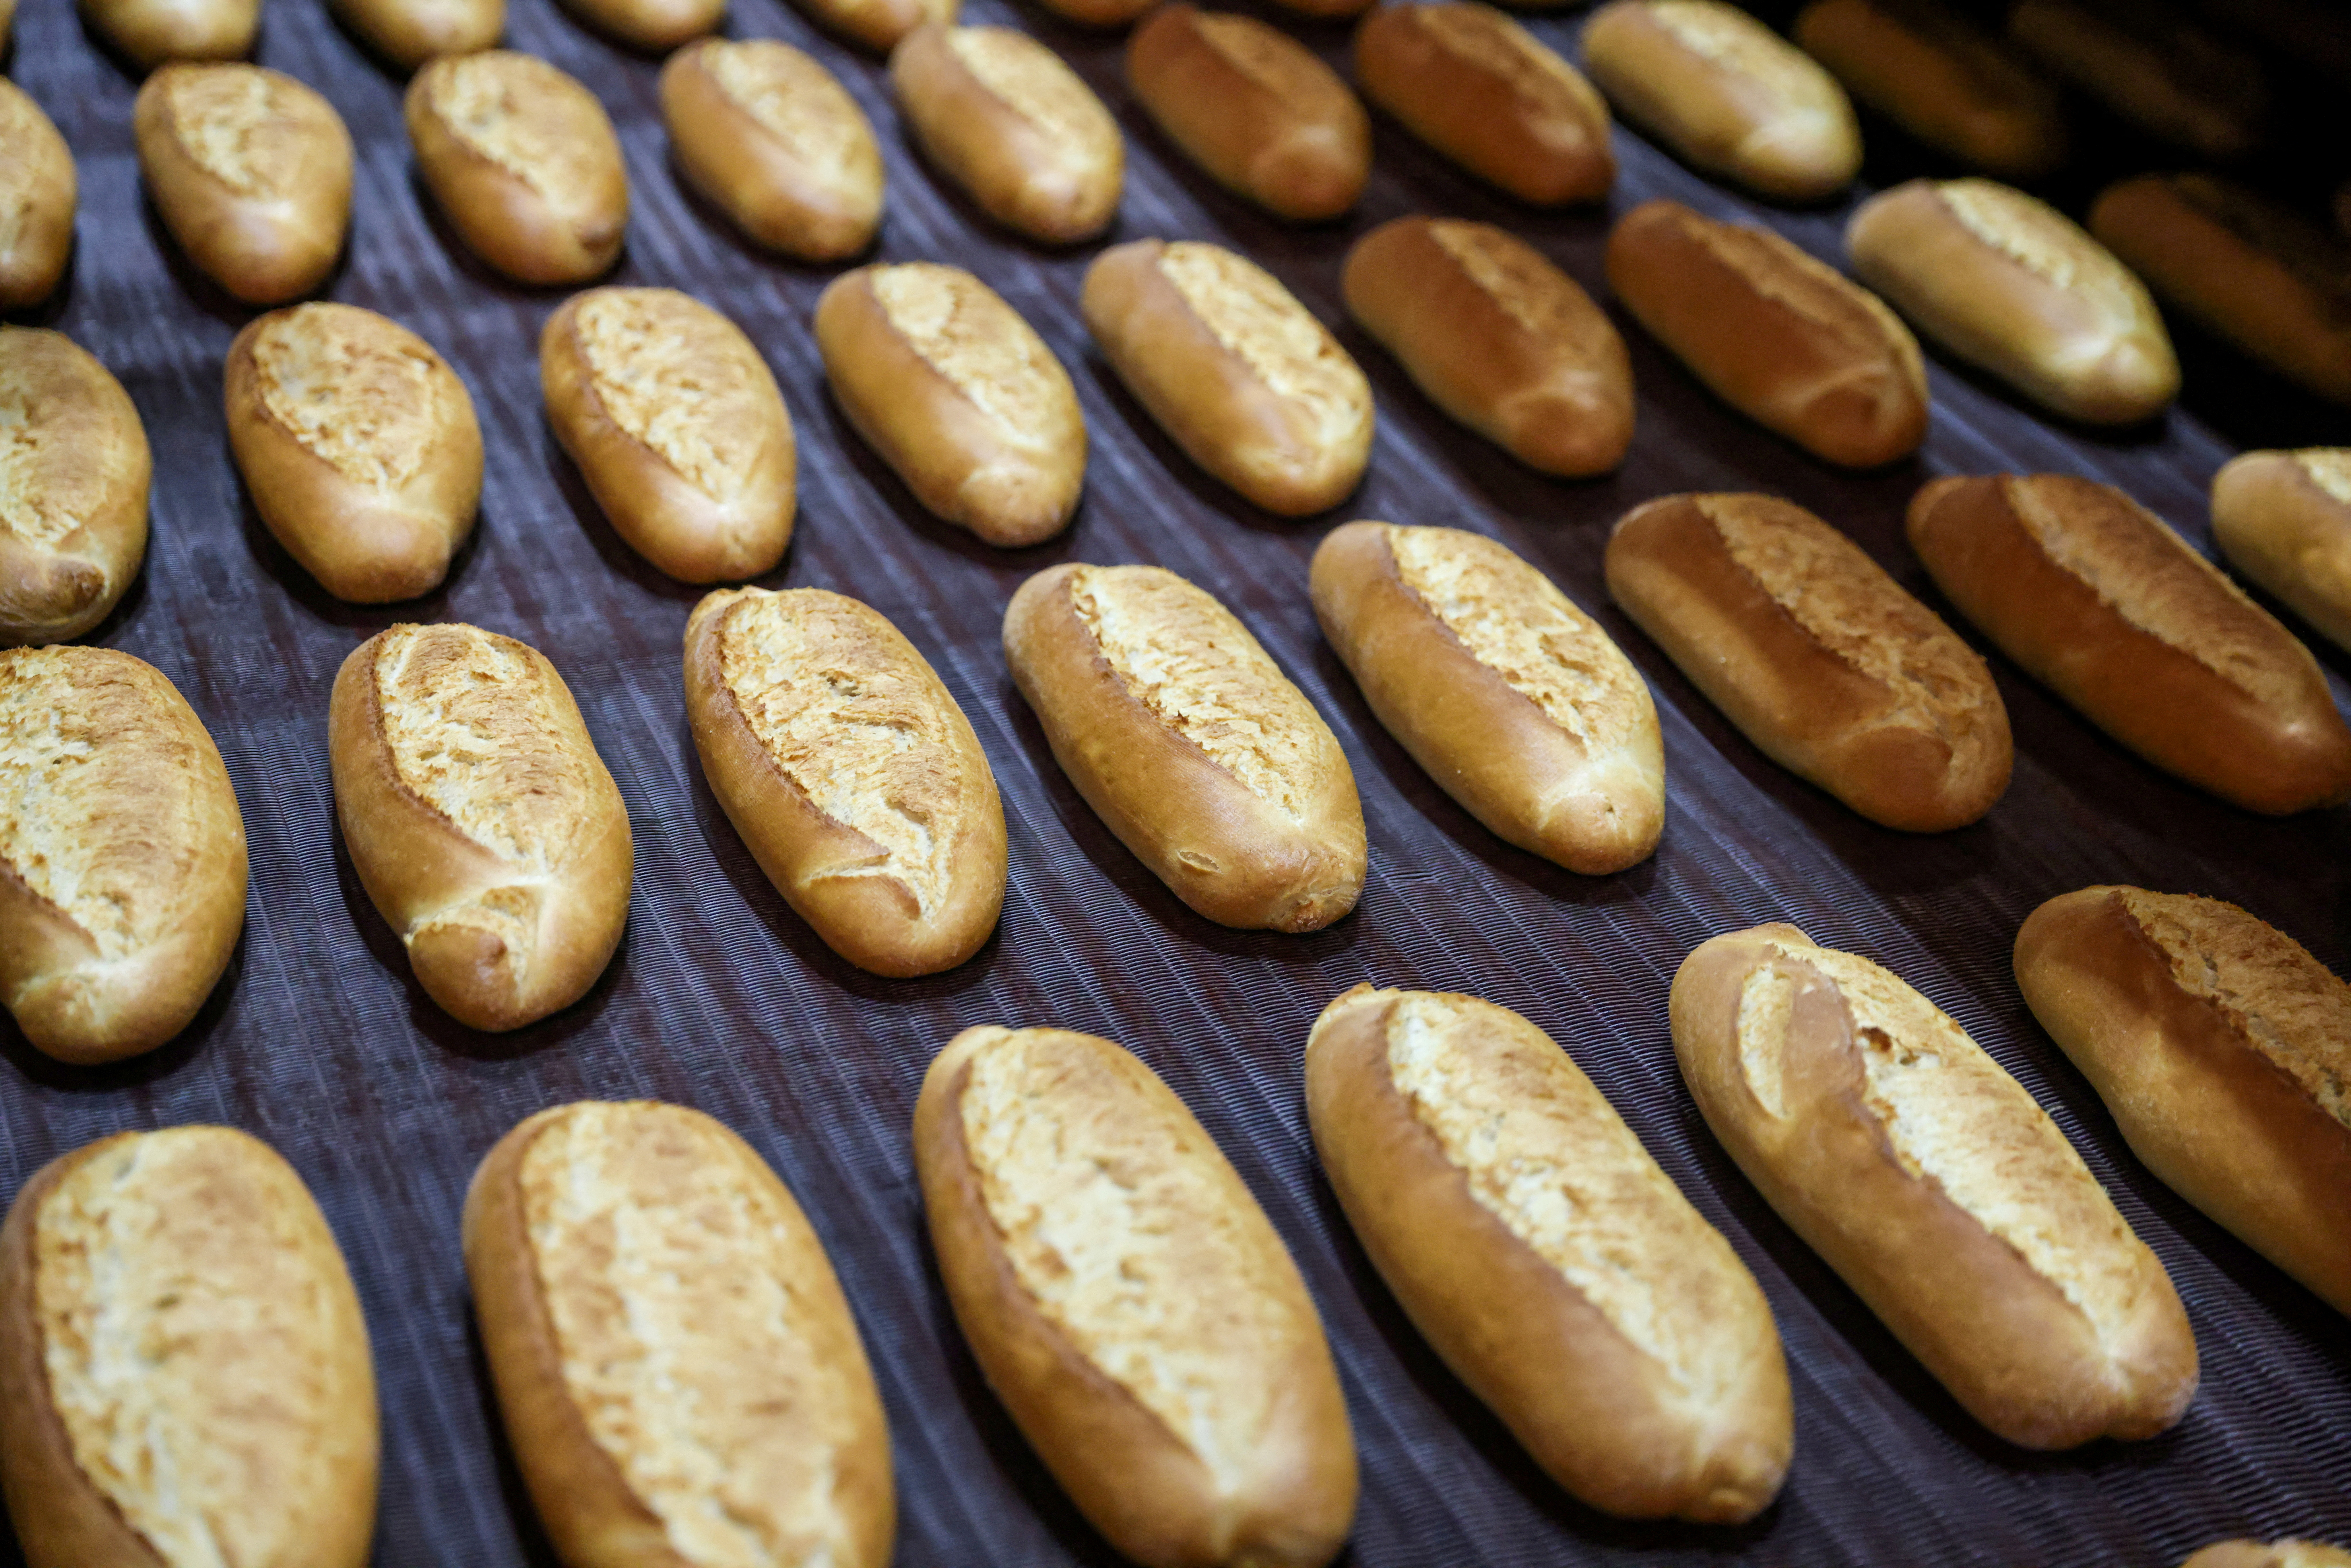 Freshly baked loaves of  bread are seen at a production line at Istanbul Municipality's People's Bread factory in Istanbul